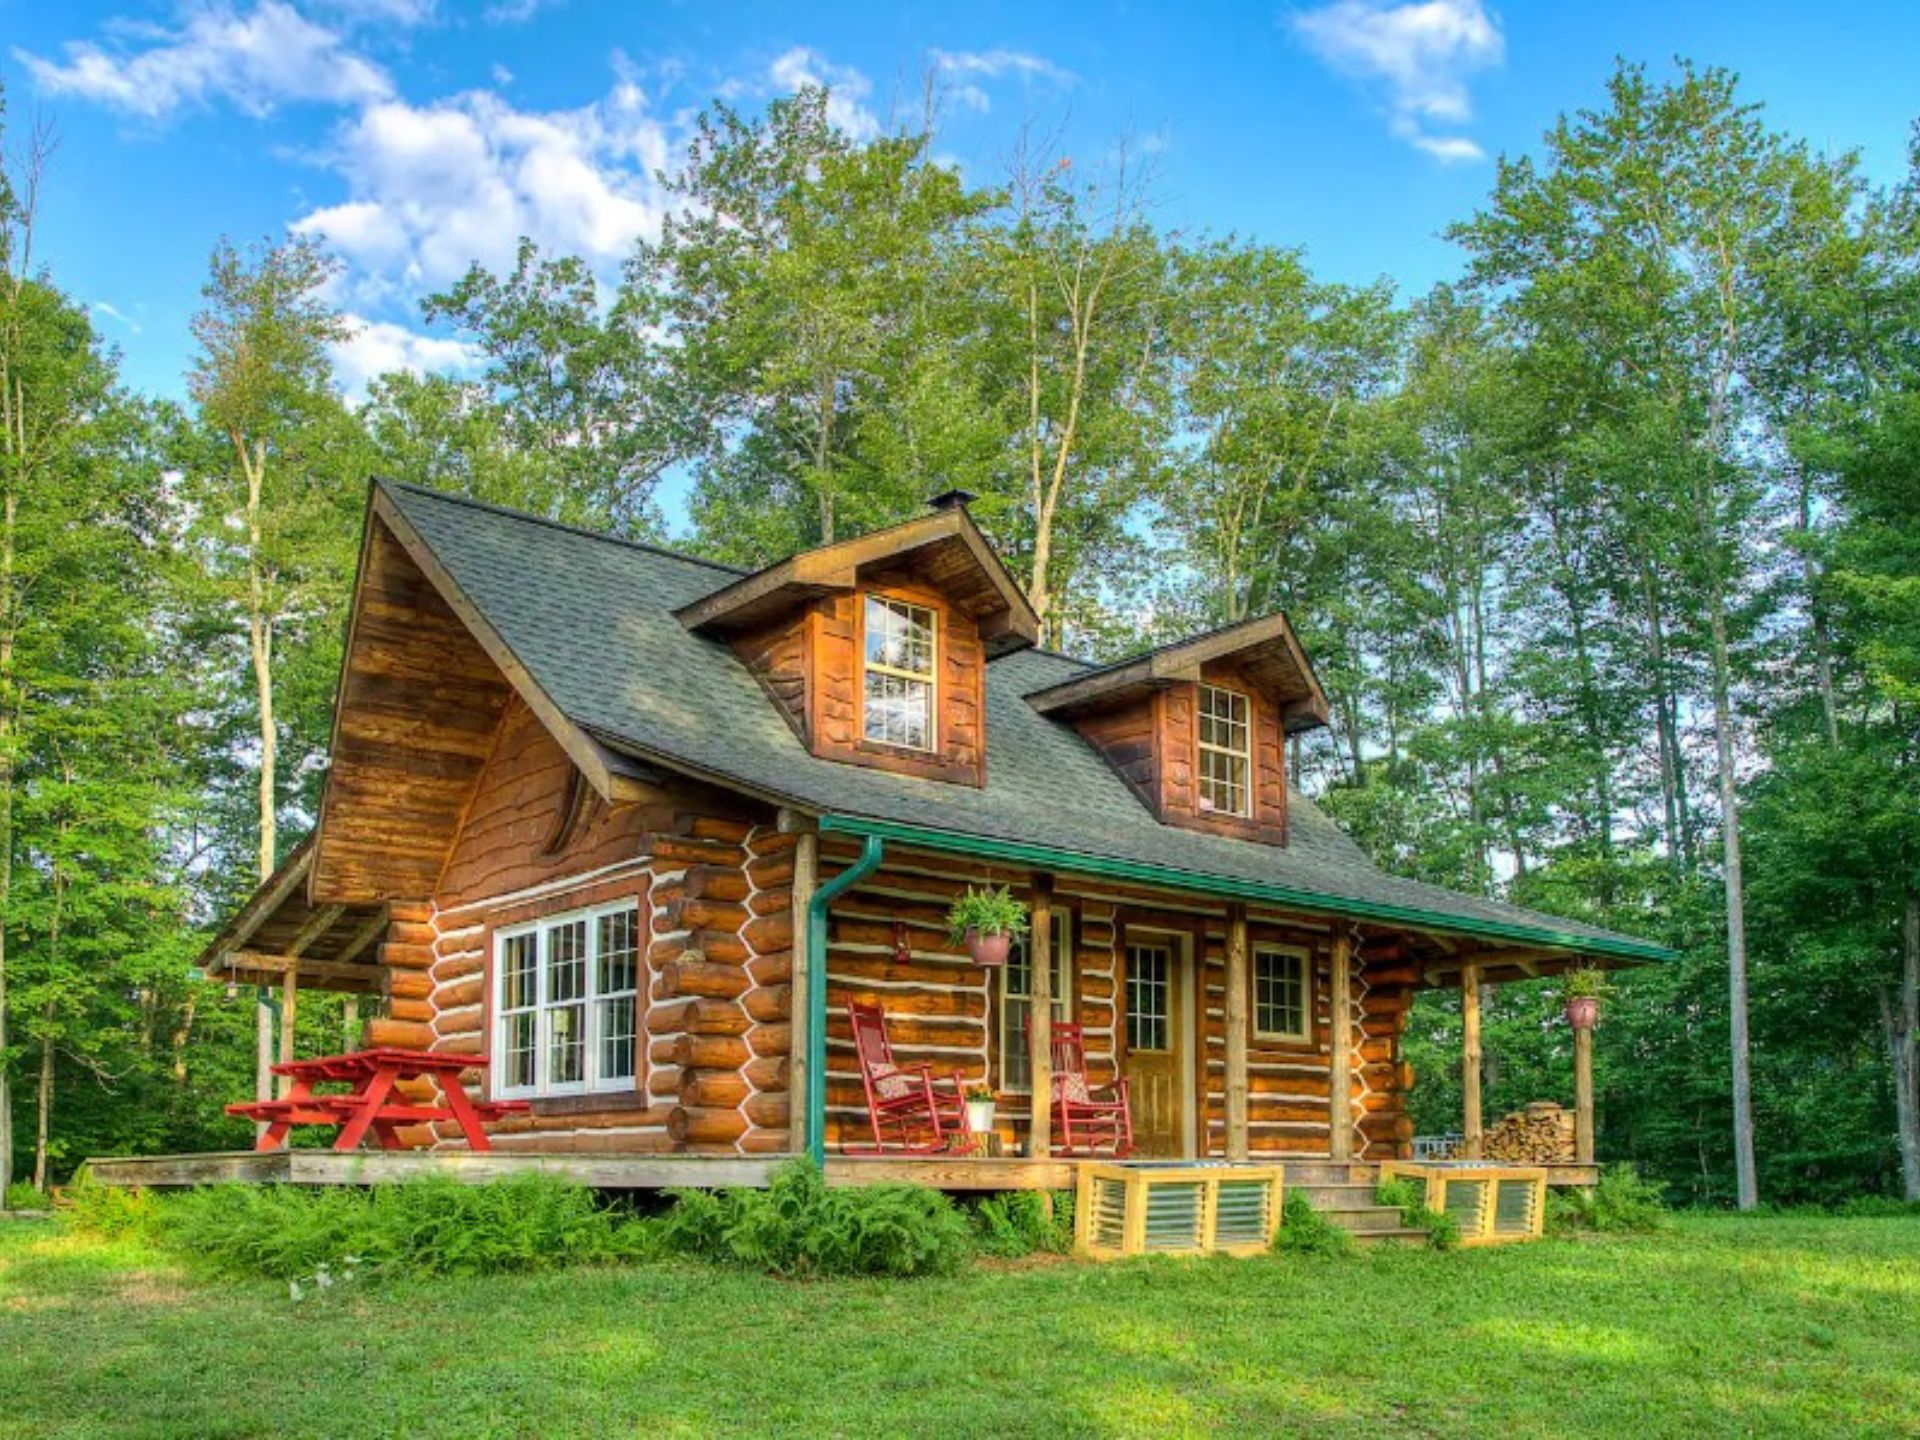 This Stunning Cabin In The Woods Is Perfect For Some Rest And Relaxation